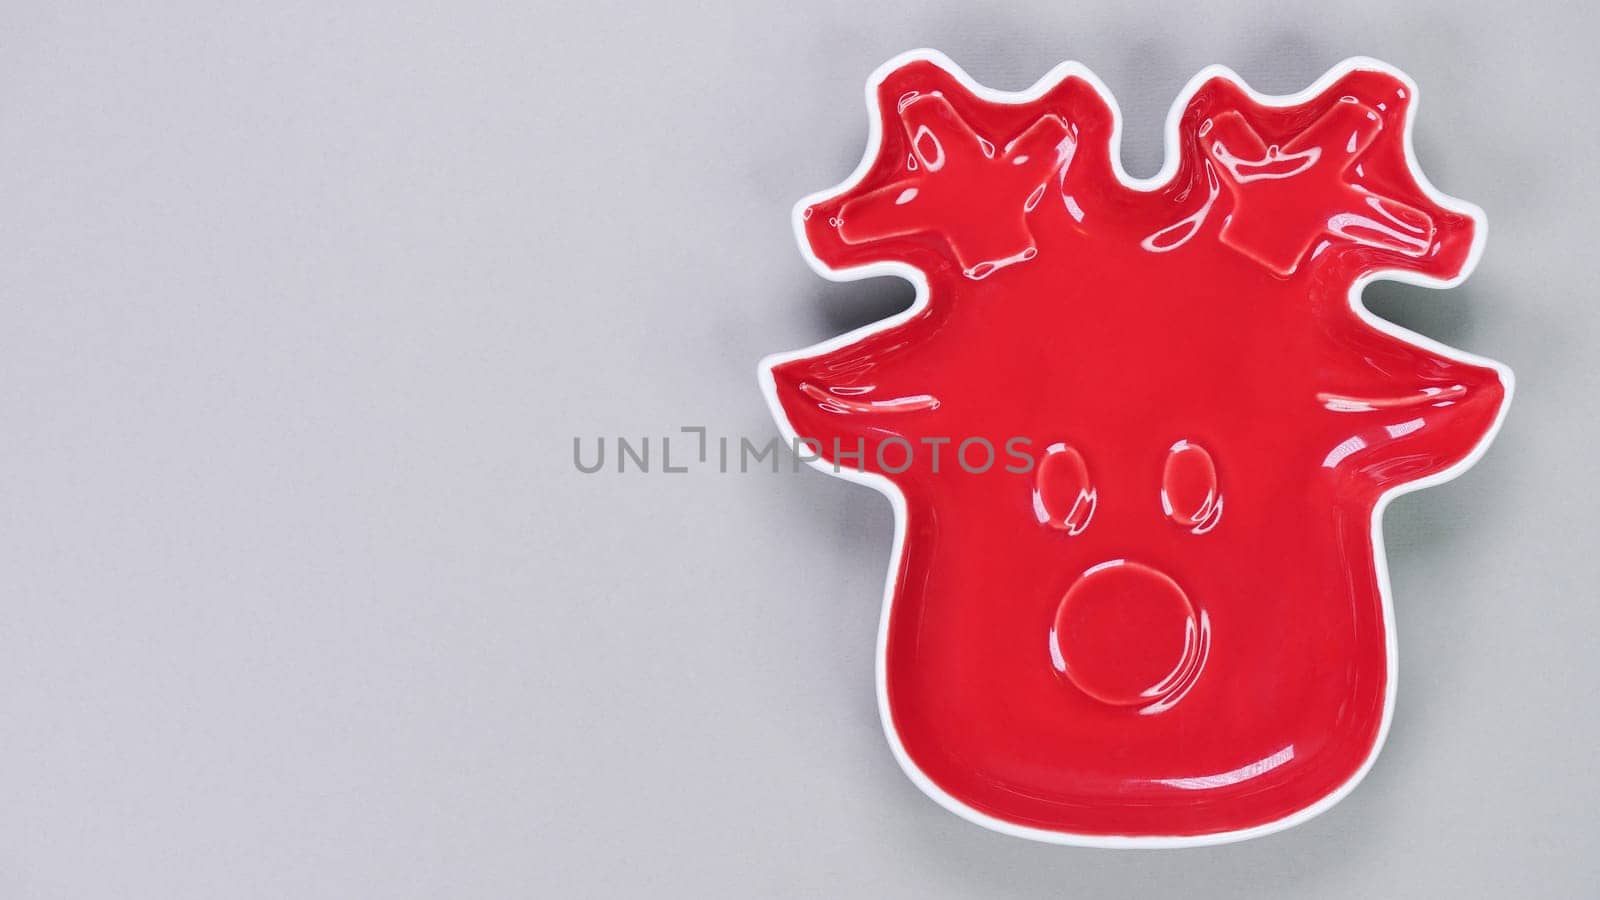 Festive table setting with red plate in Christmas raindeer shape on grey background. Holiday table decoration Top view. Space for text